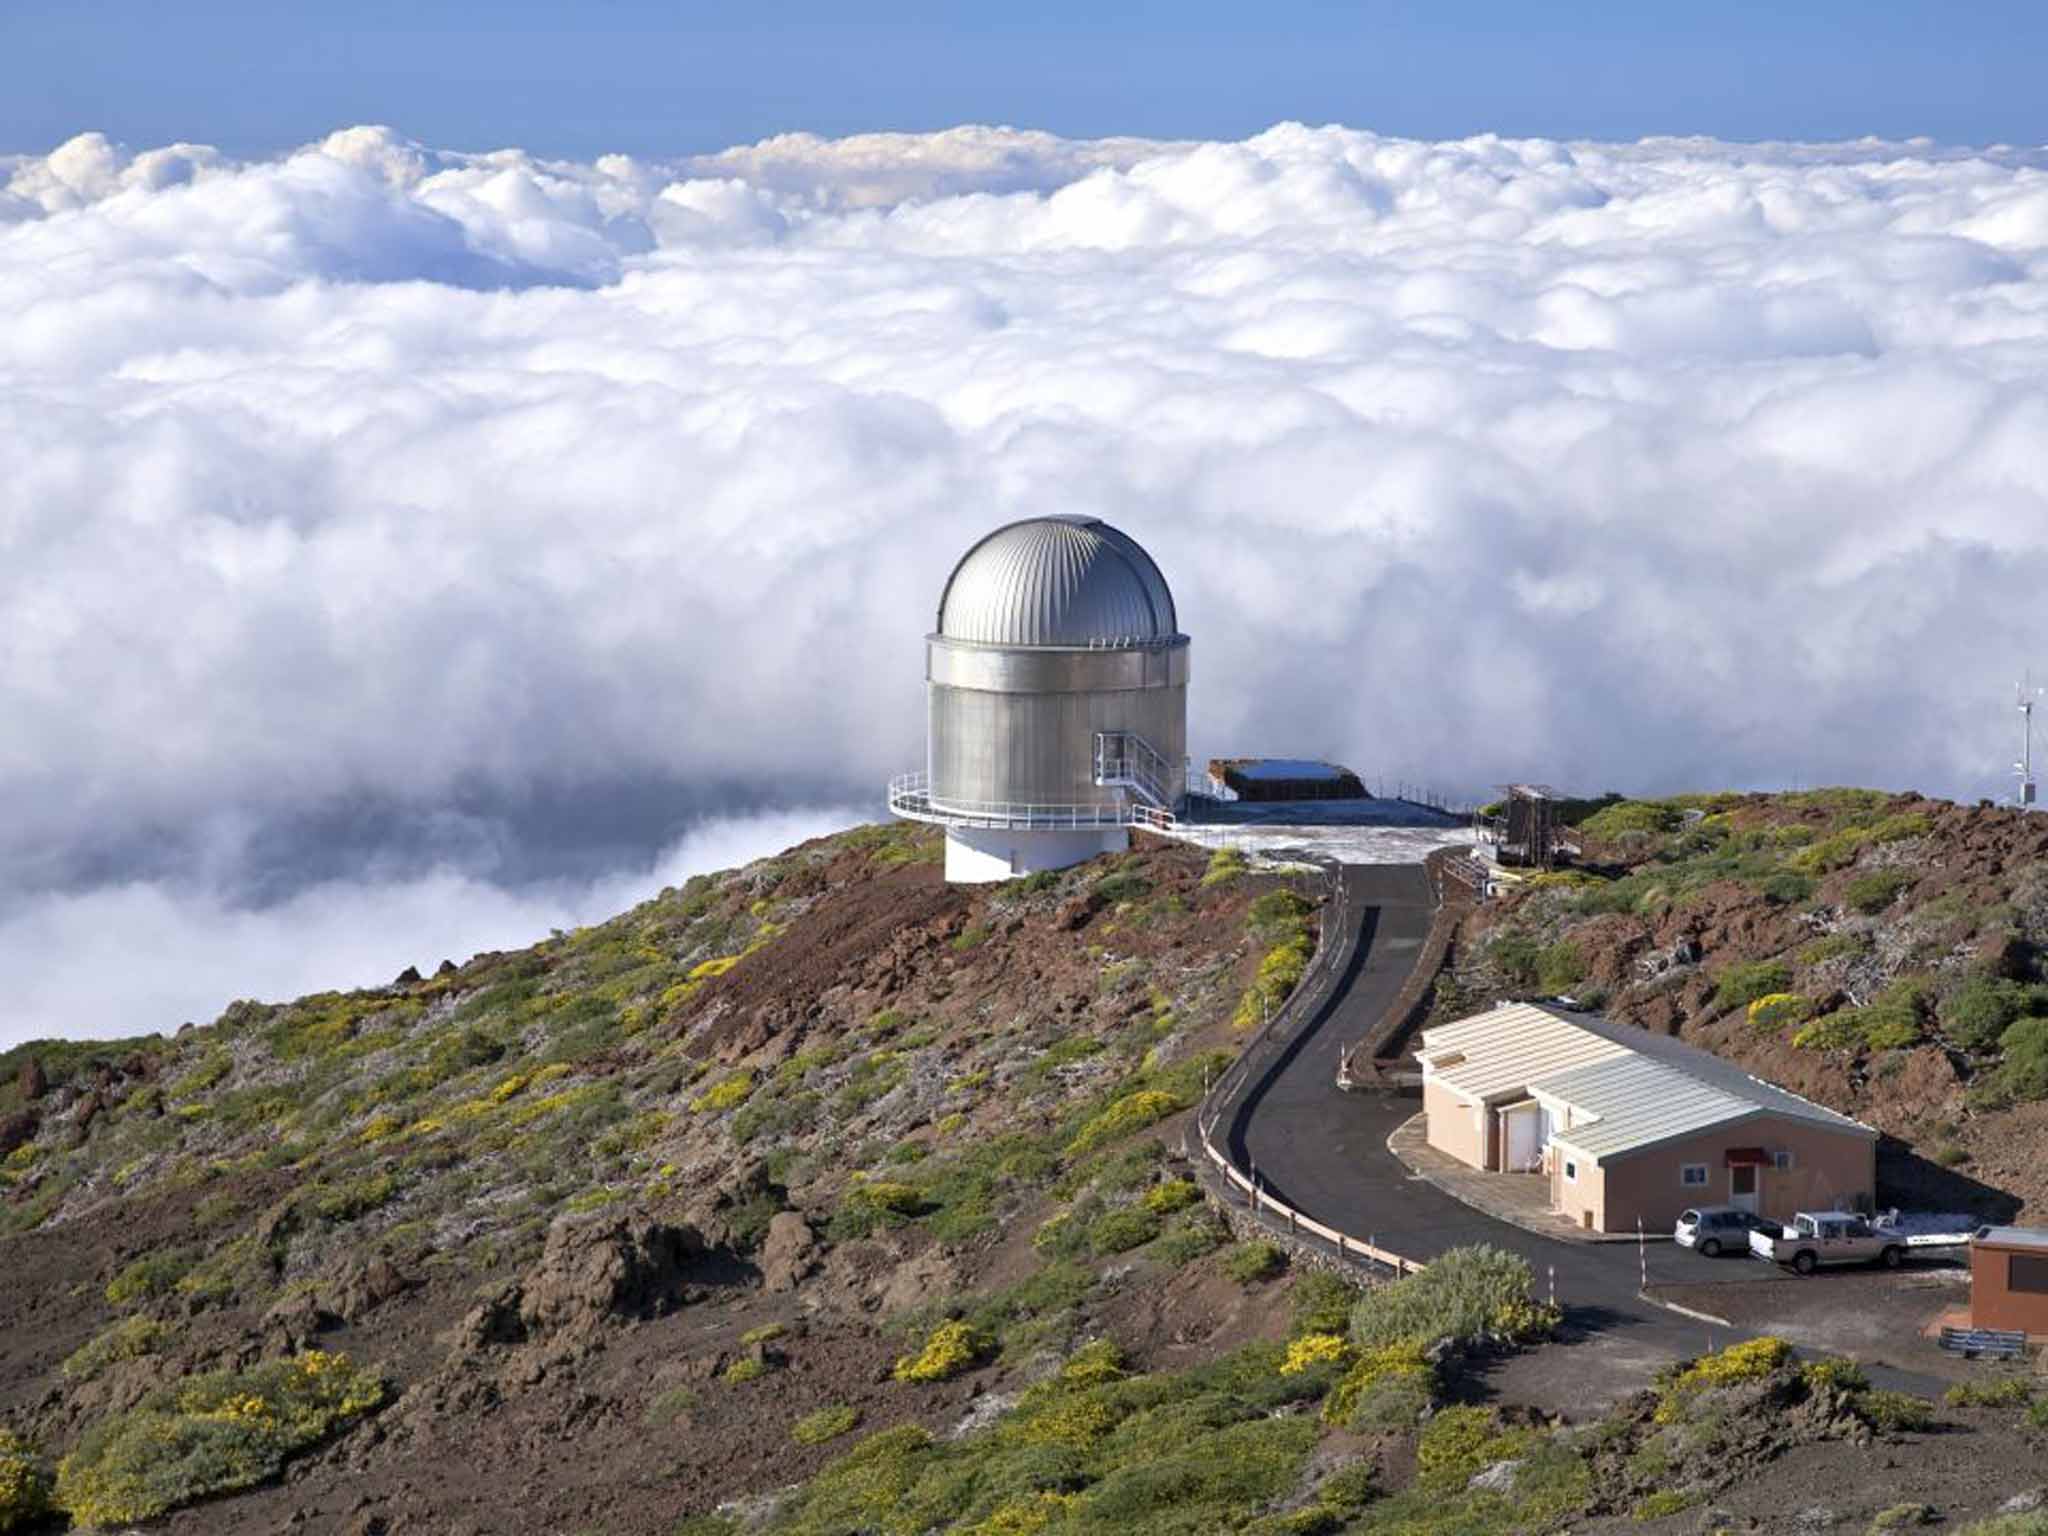 You can visit the La Palma observatory, but only by day